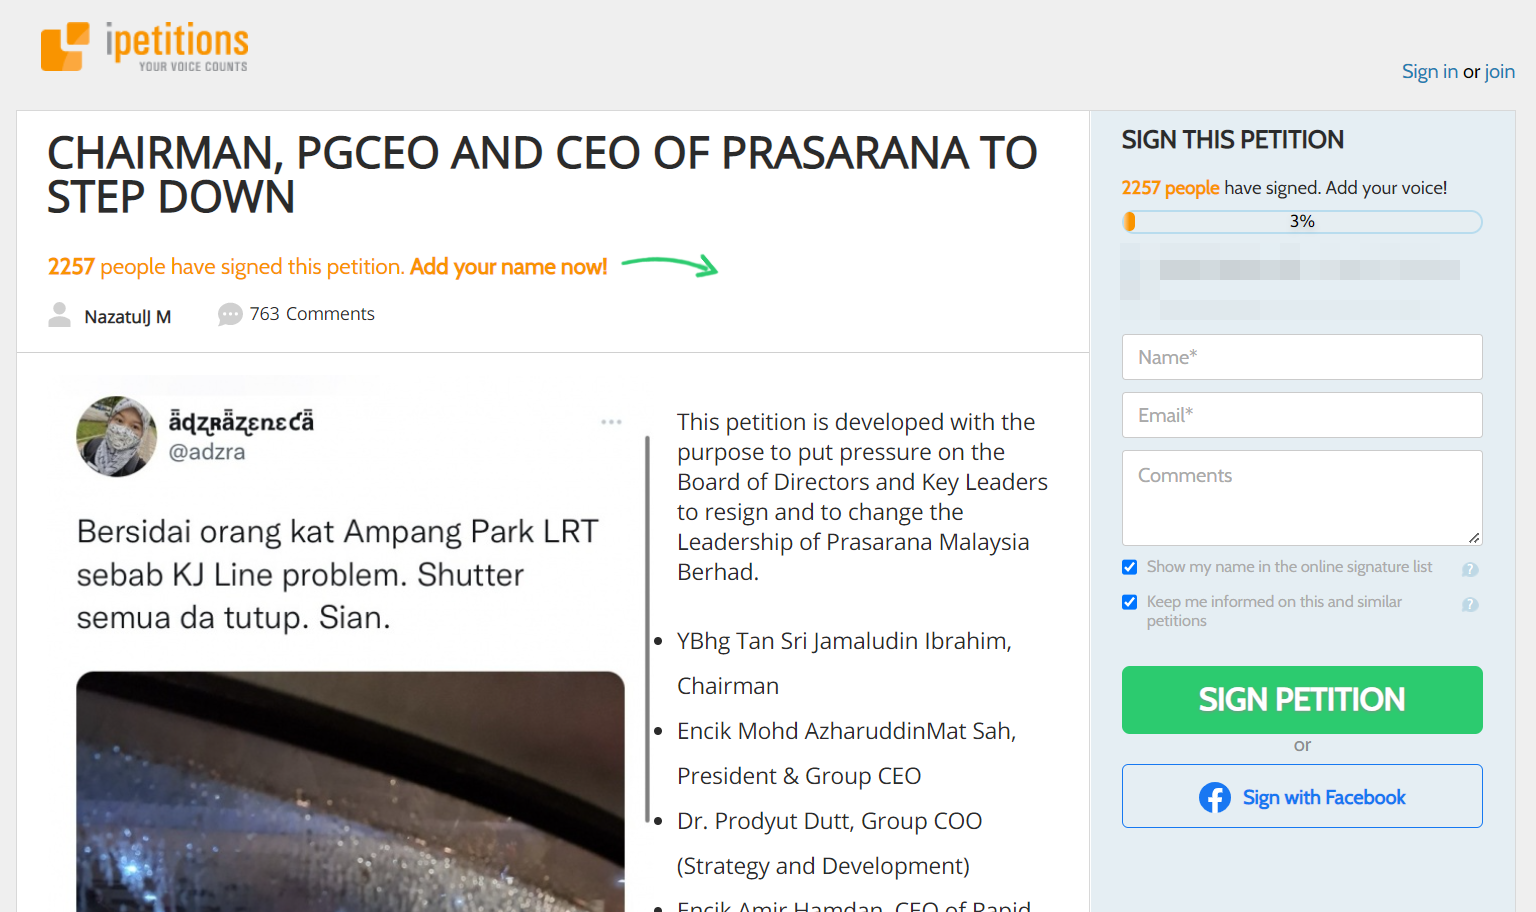 A petition calling for the resignation of Prasarana leadership is gaining traction over the LRT station closures. Image credit: iPetitions